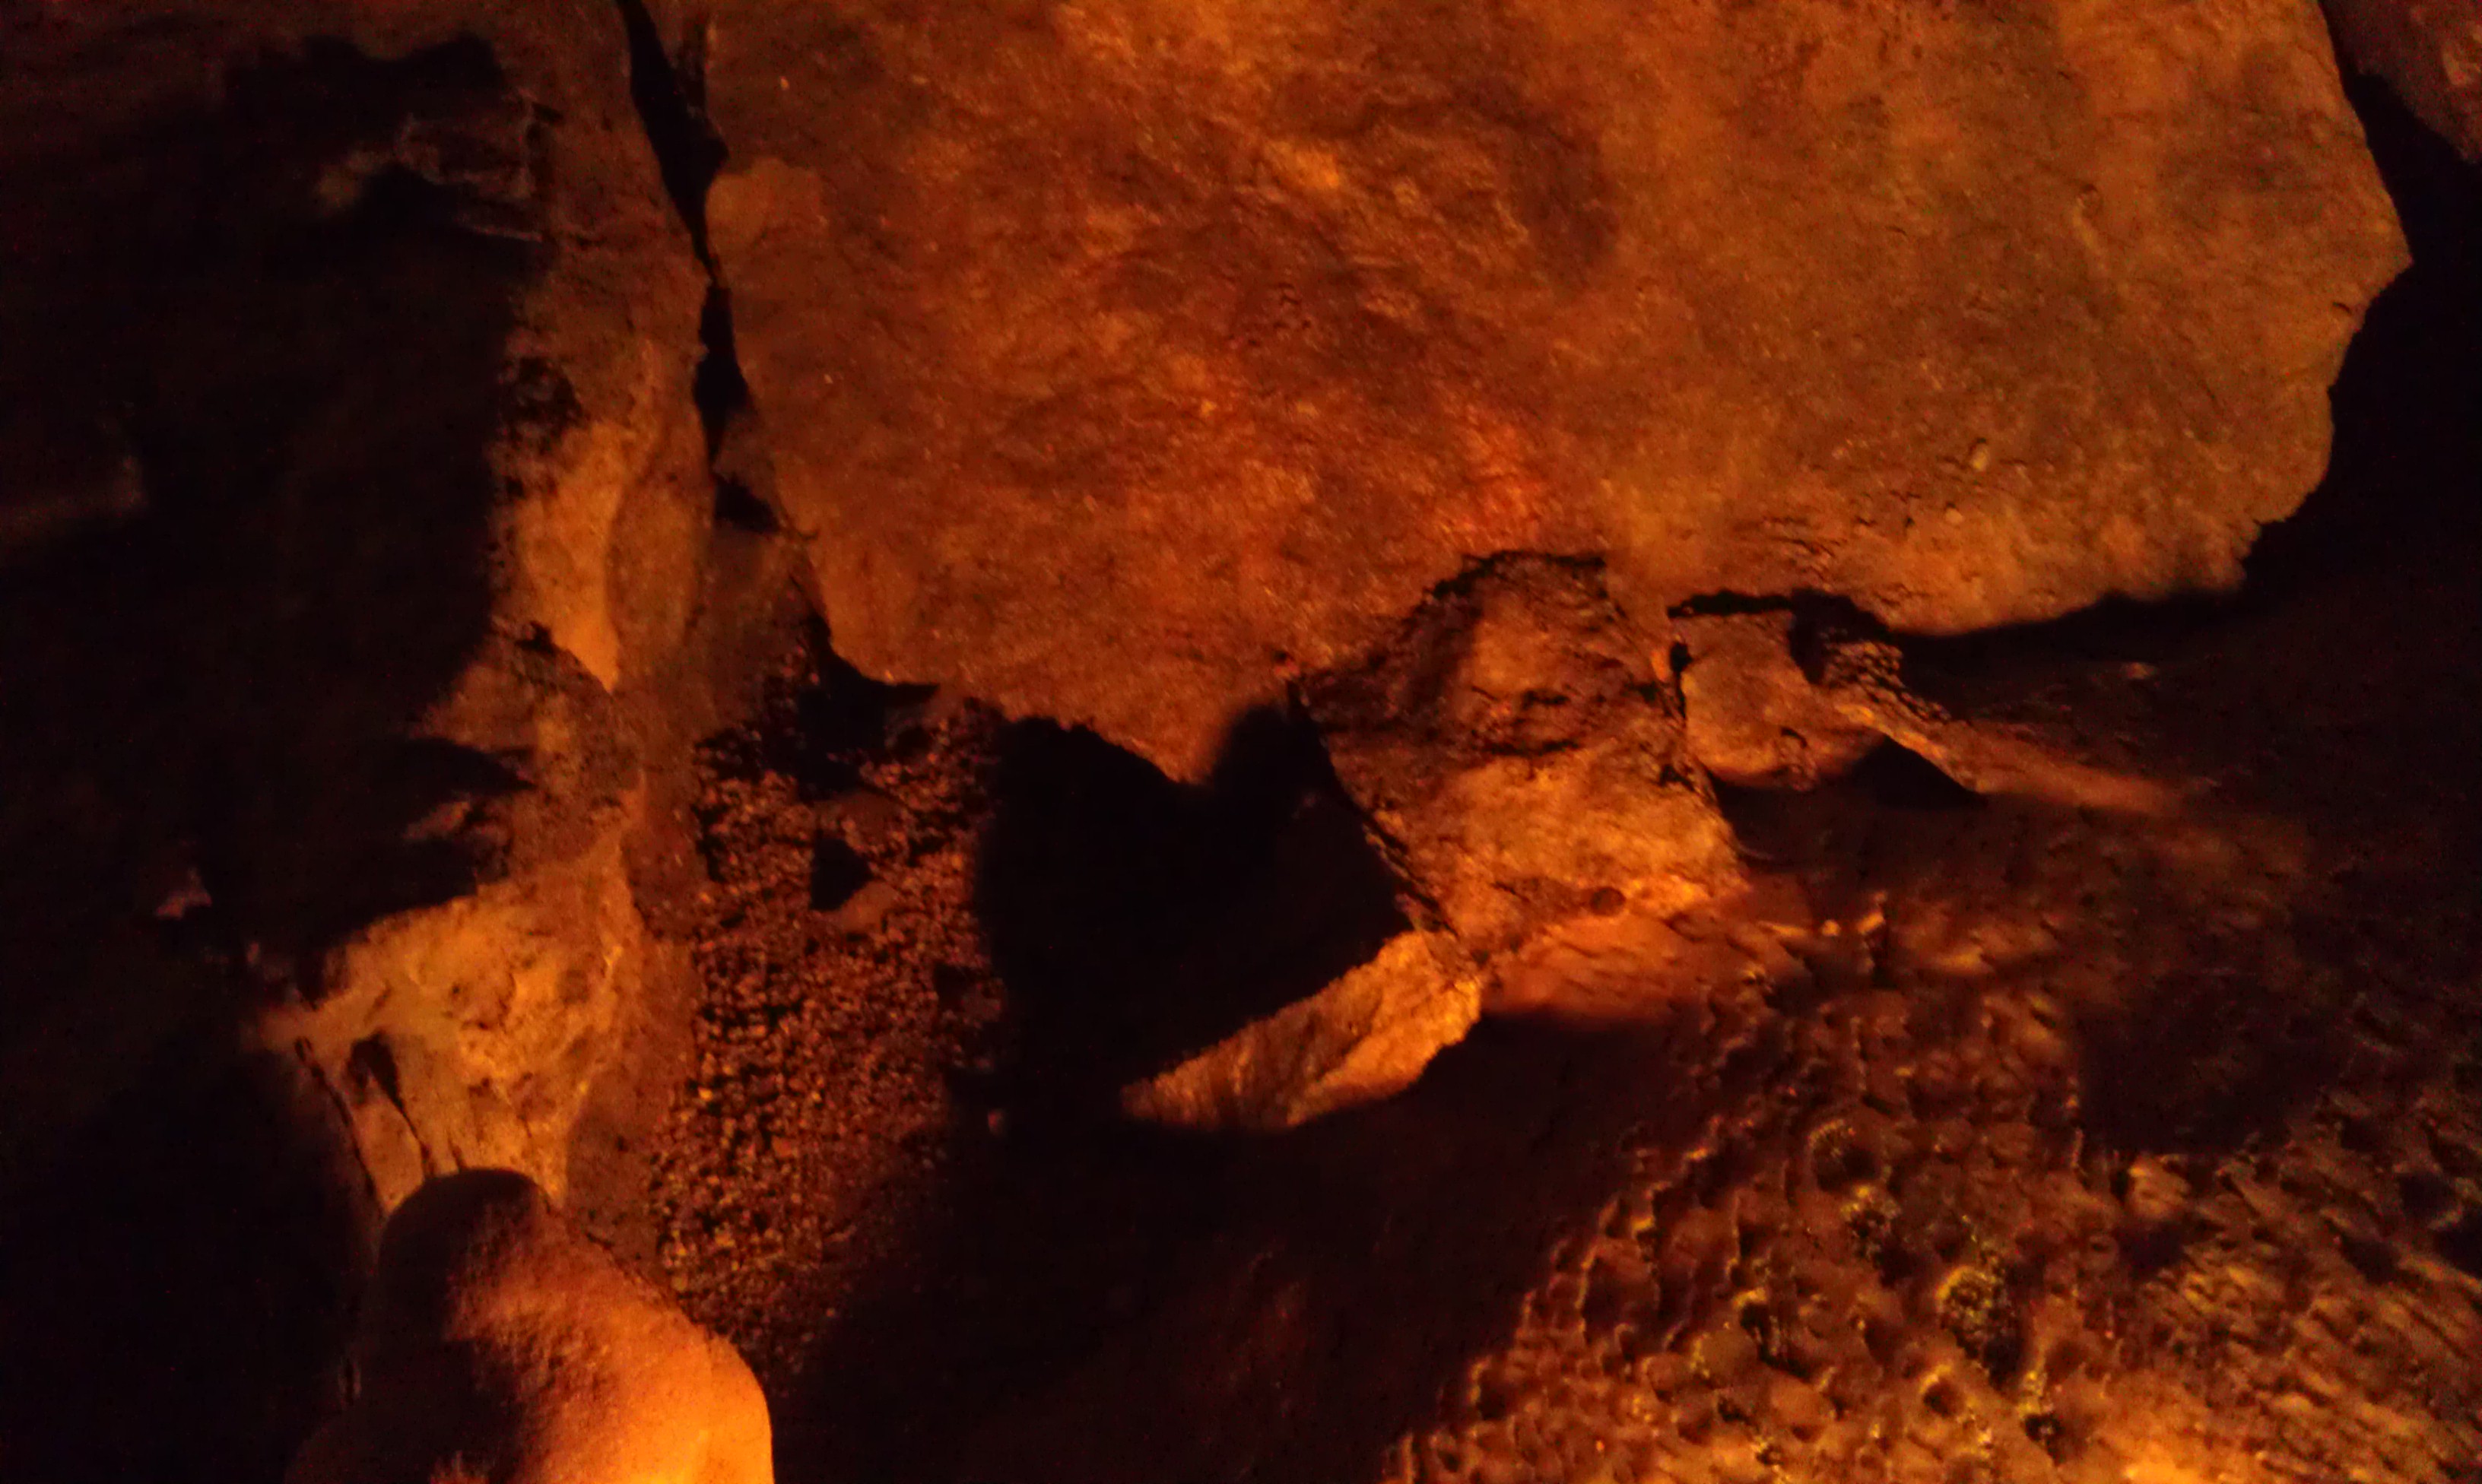 Photo 1 from Crystal-cave